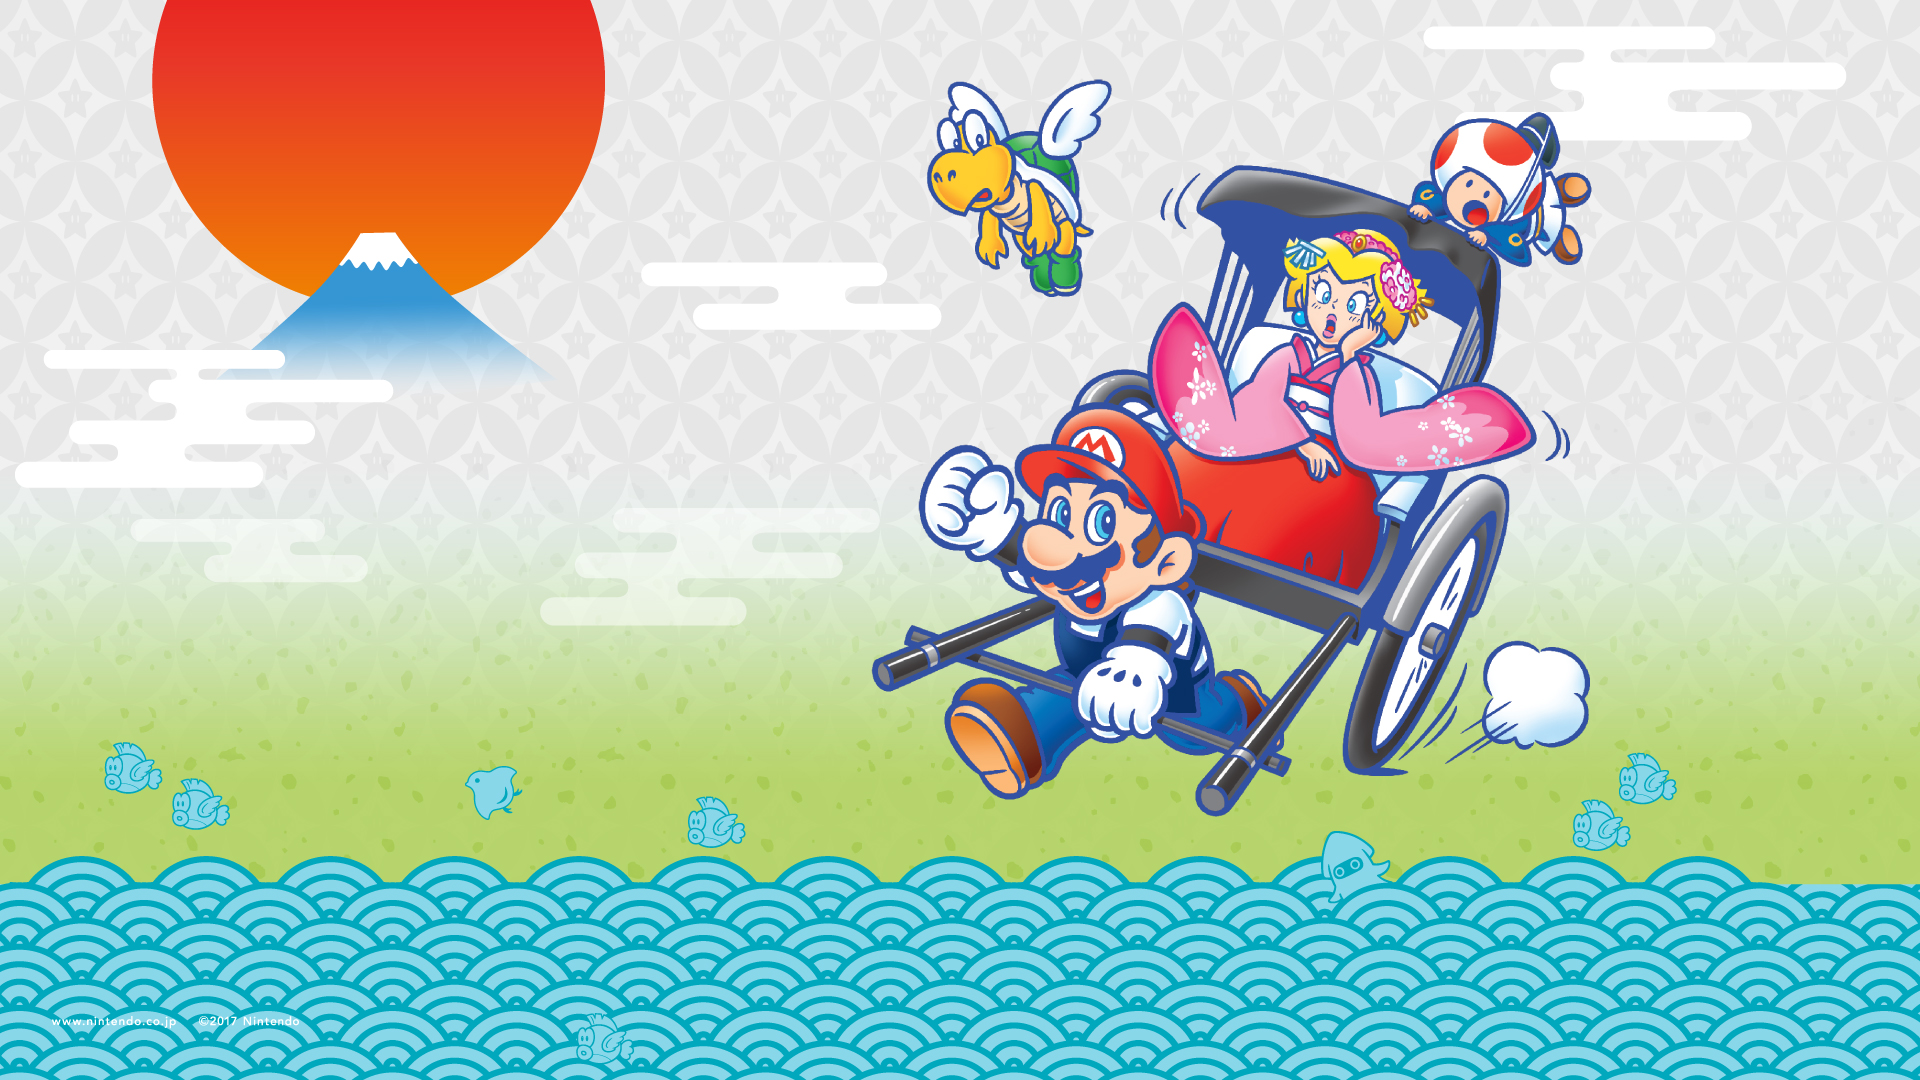 New Official Mario Wallpaper from Nintendo Desktop and Mobile